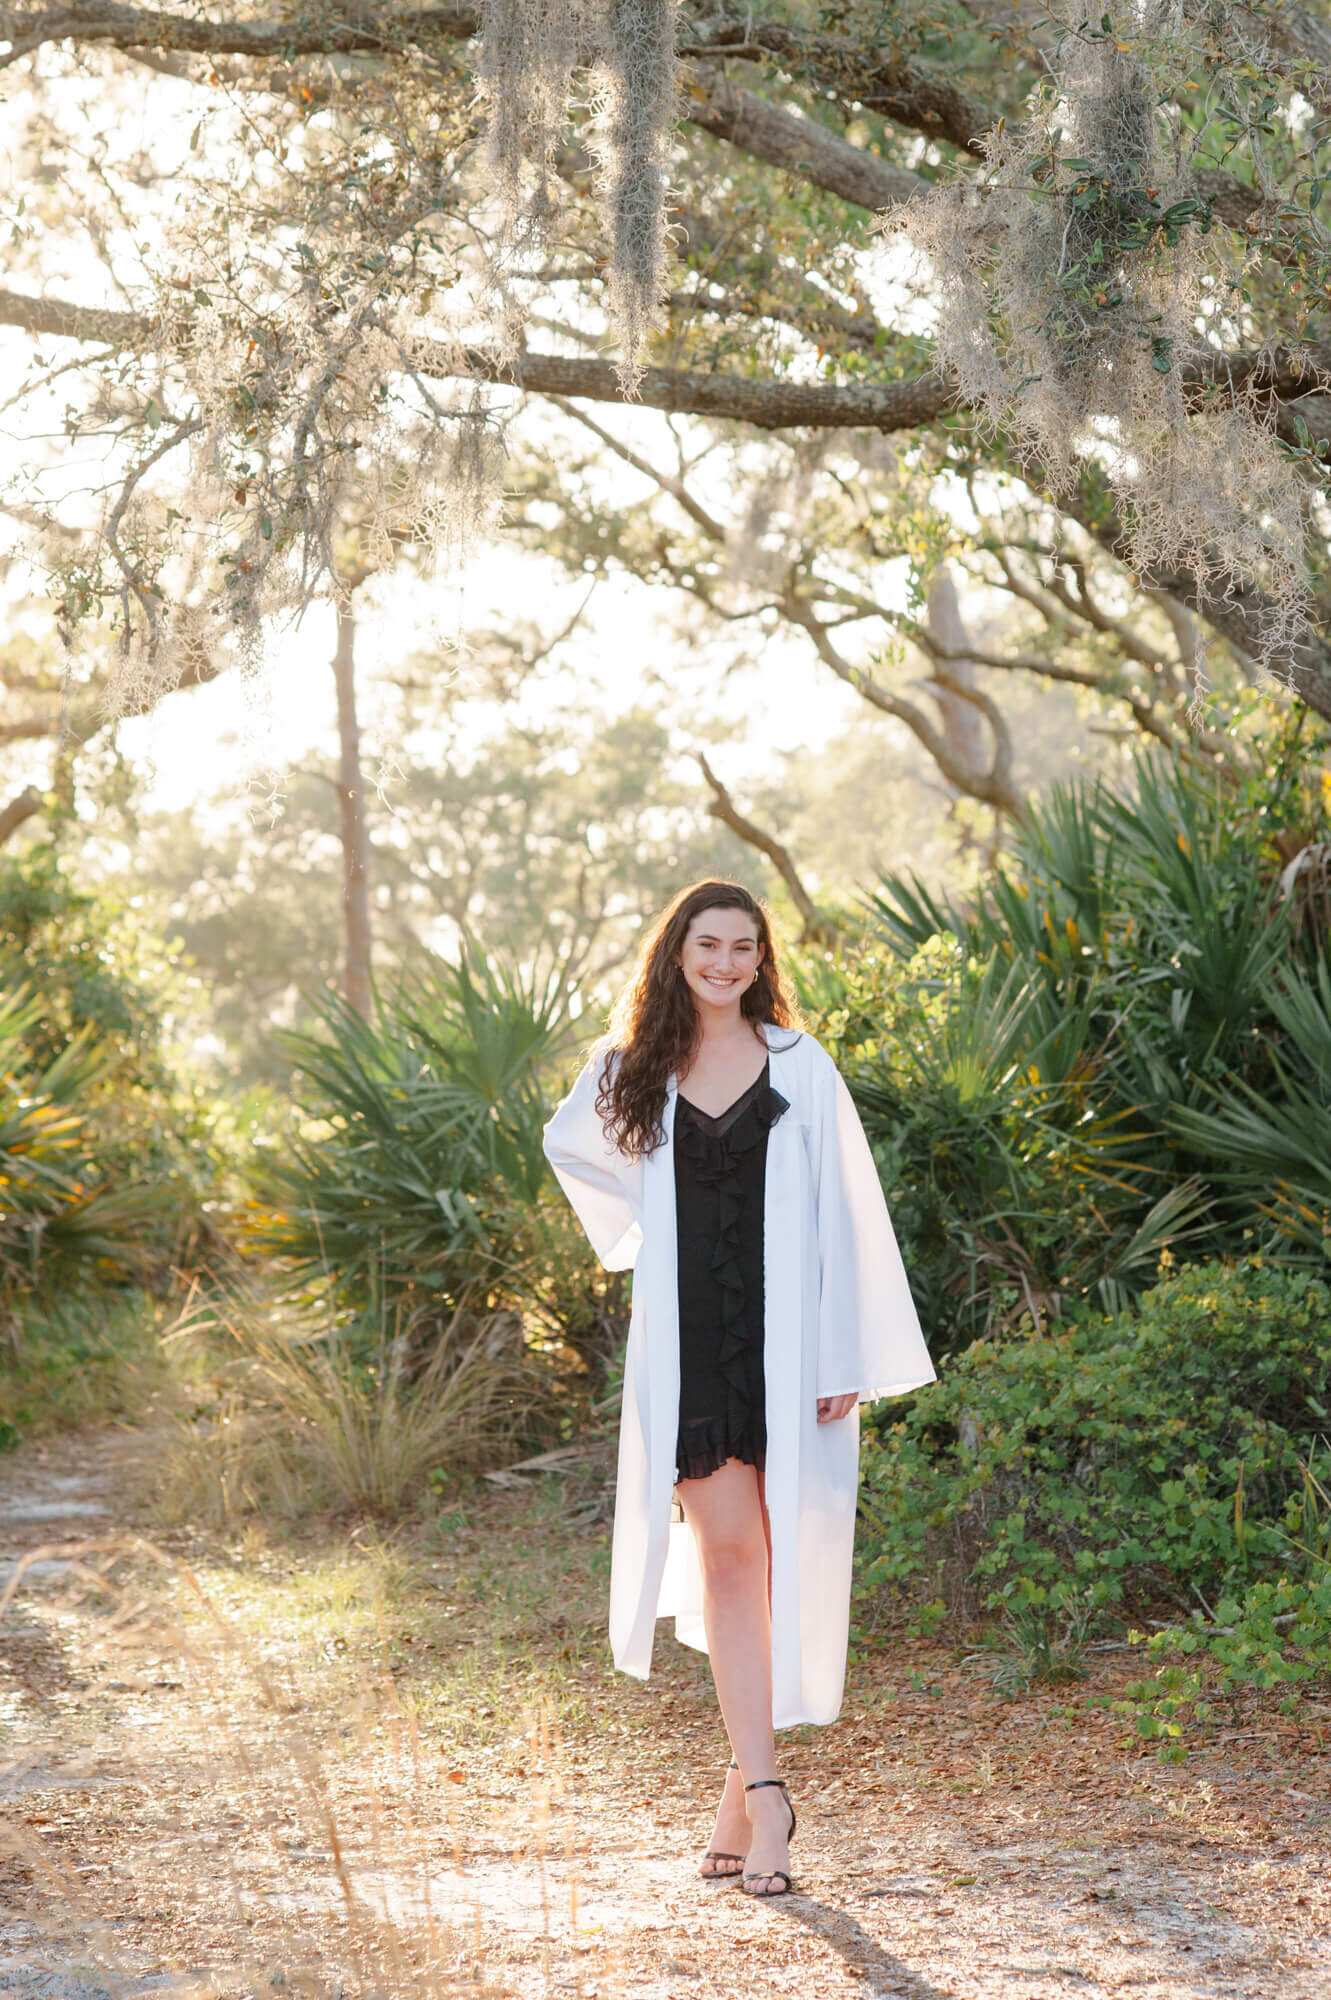 Senior girl wearing her gown stands next to a tall mossy oak tree during her senior photoshoot at WIckham Park